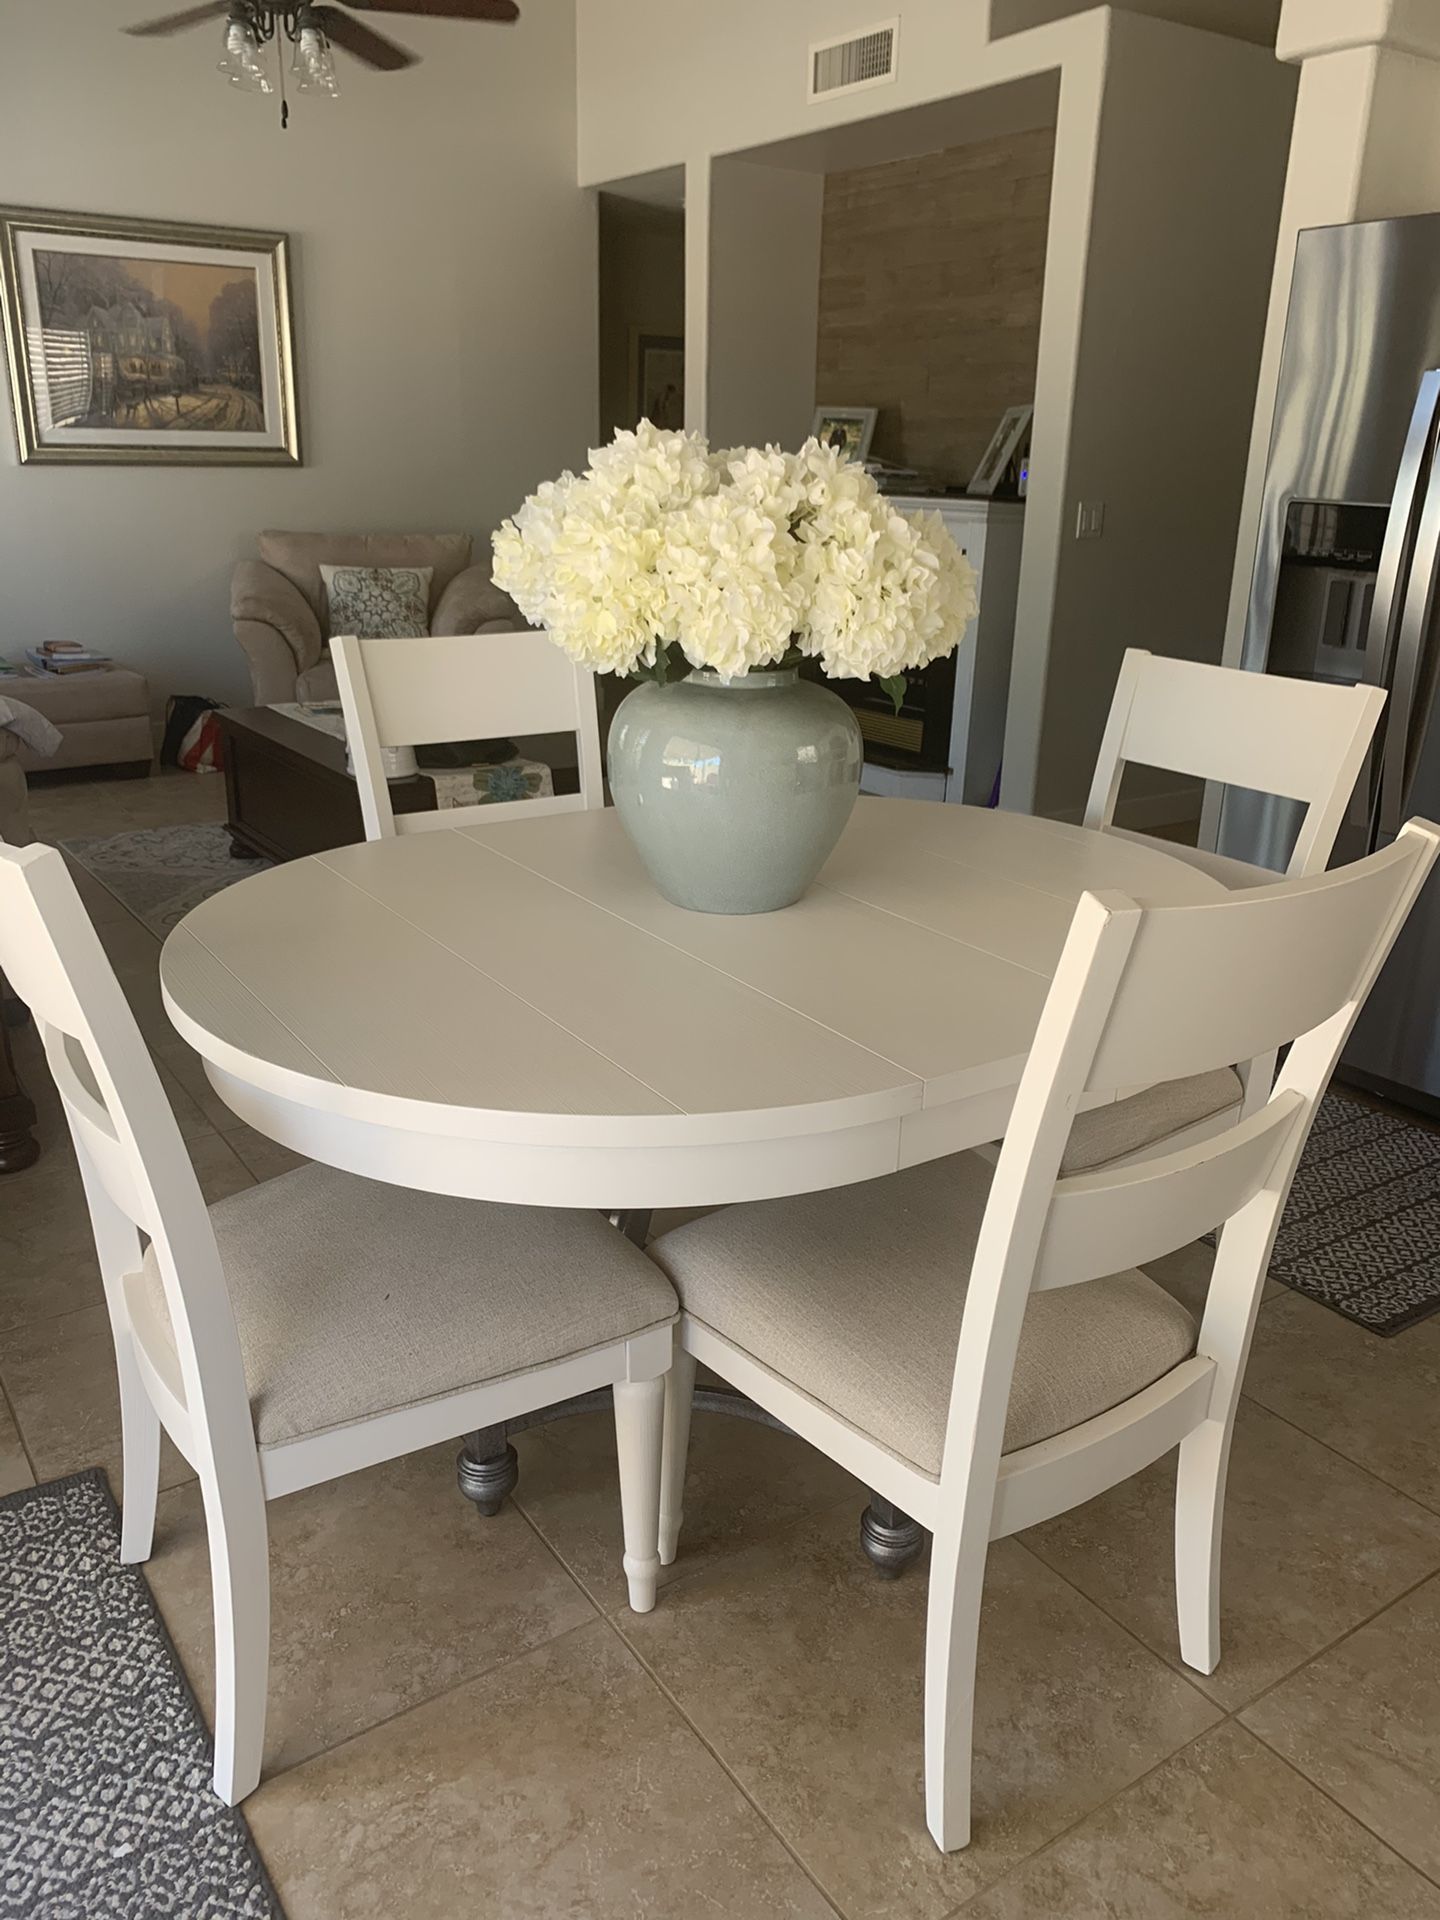 WHITE 5 PIECE KITCHEN TABLE AND. CHAIRS (Jacklin by Kelly Clarkson furniture)